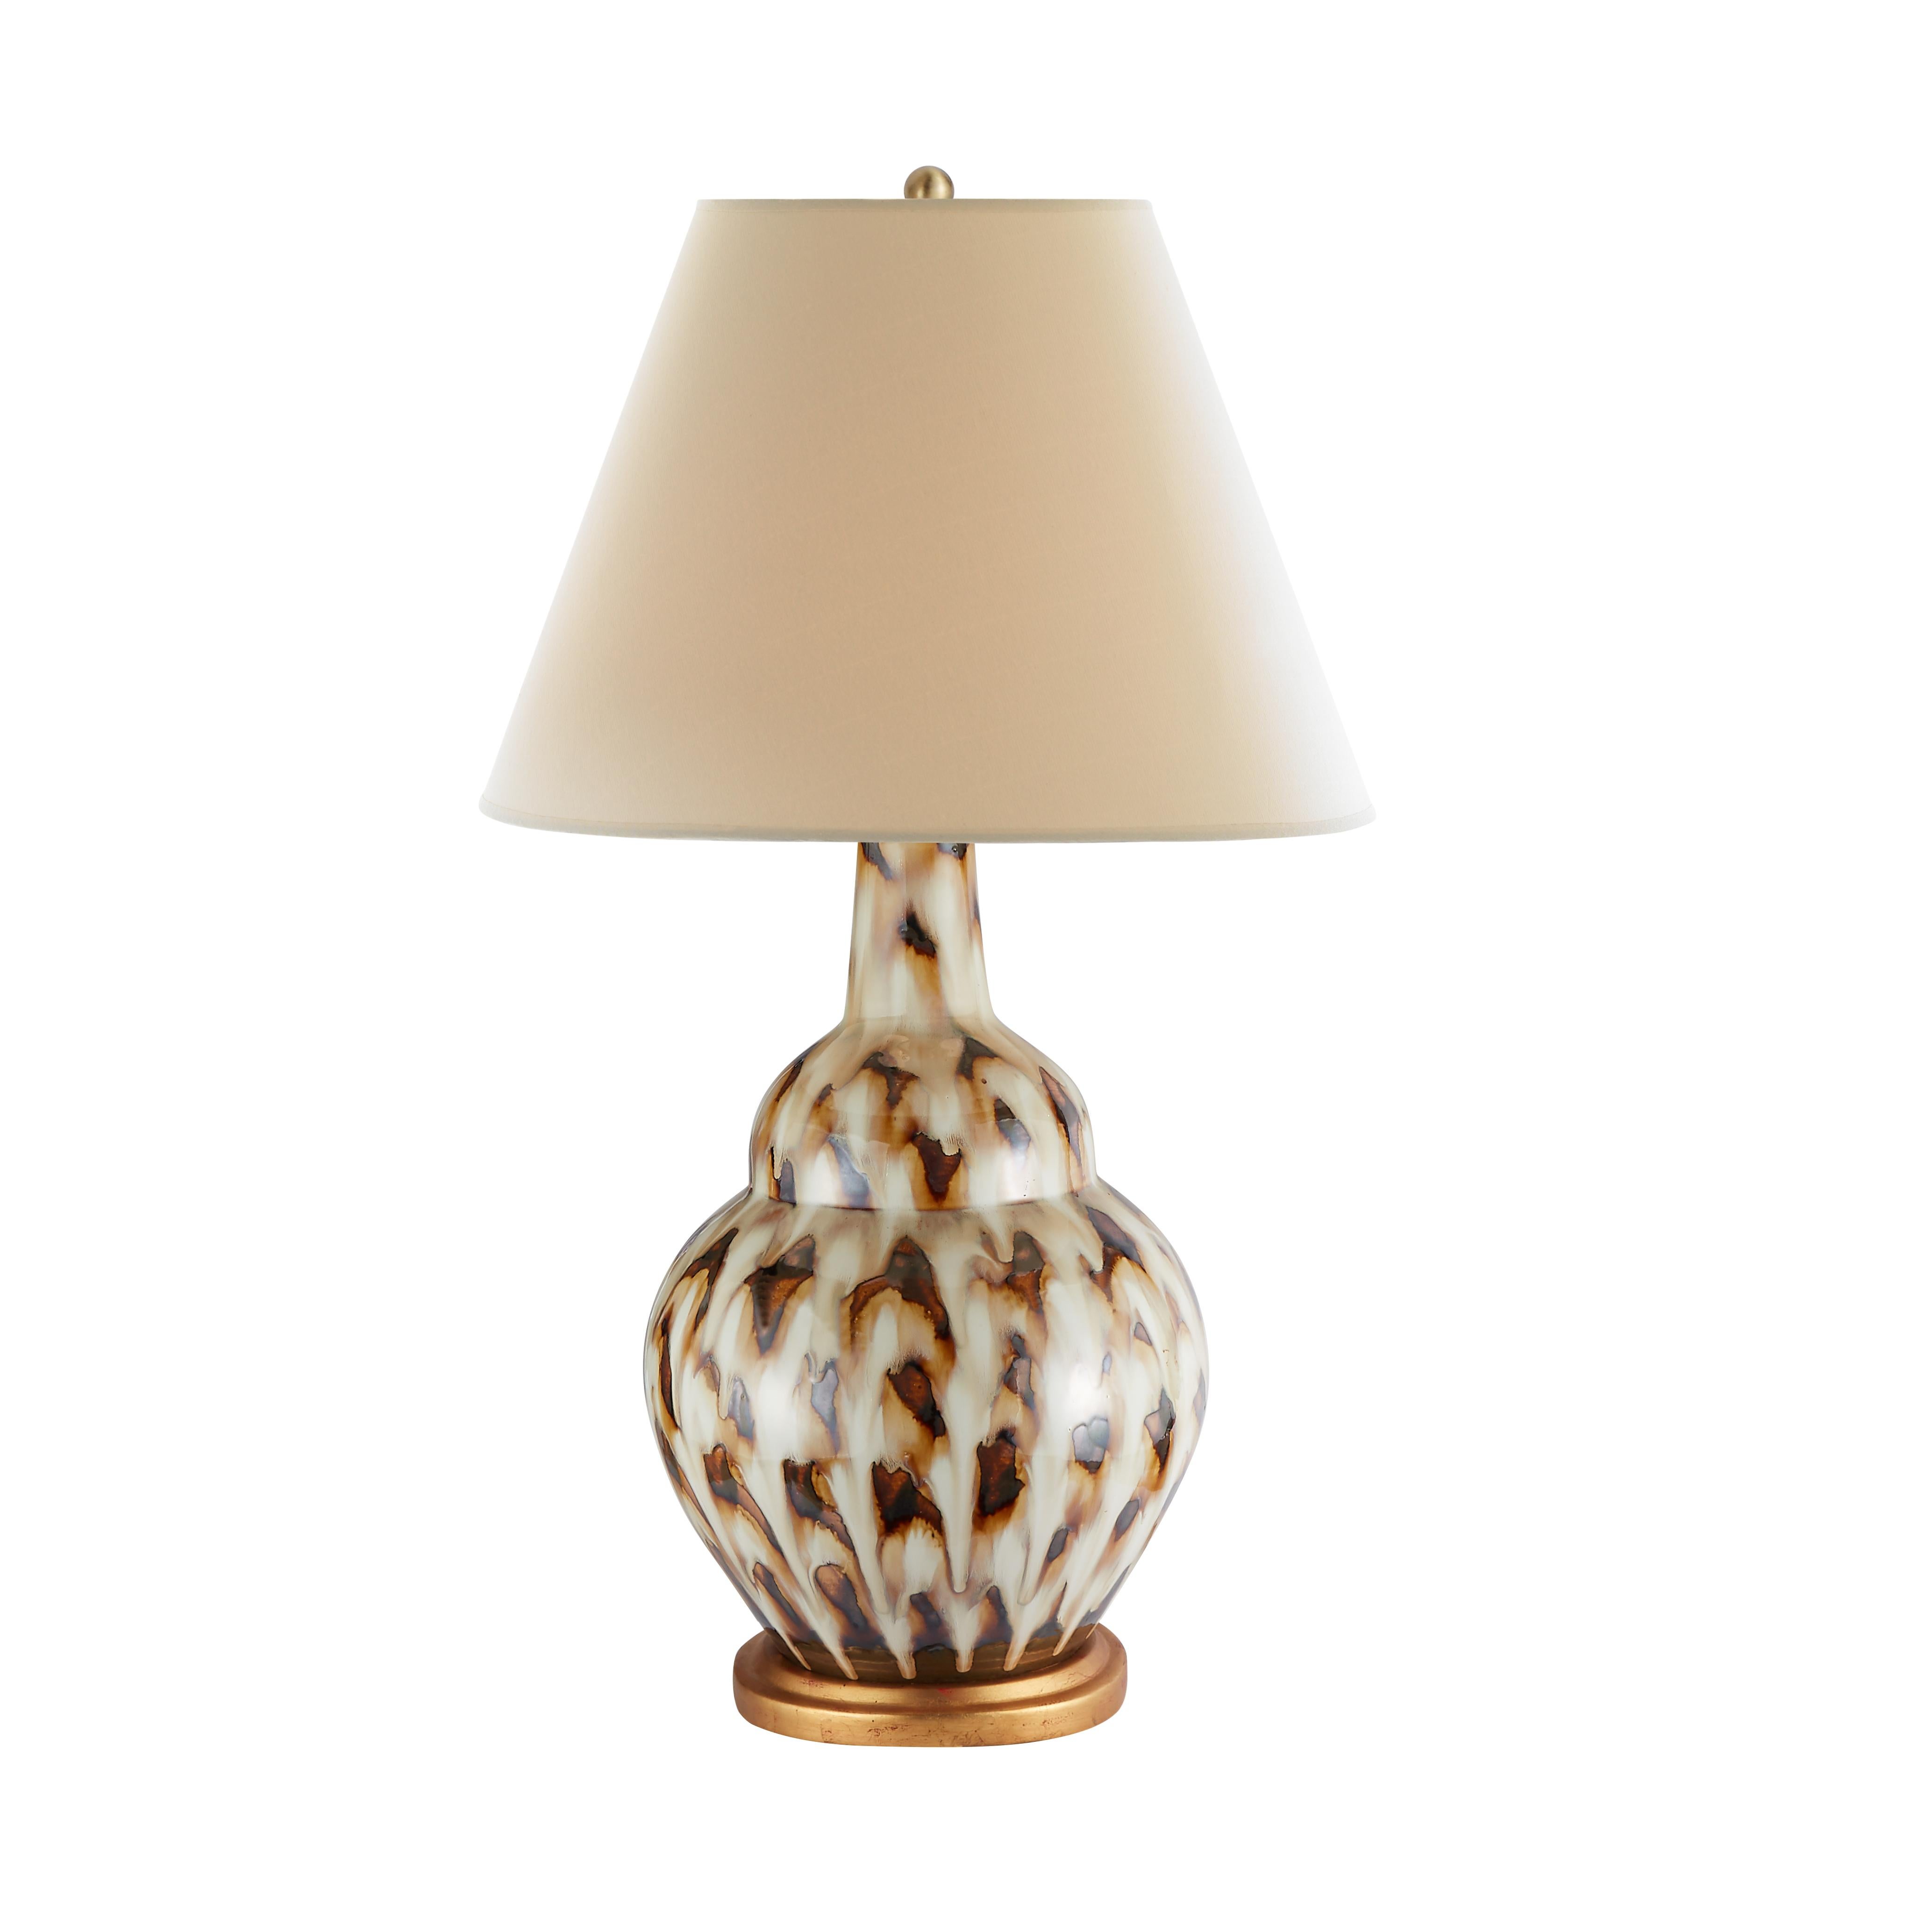 Contemporary Bunny Williams Home Pheasant Feather Lamp, Brown